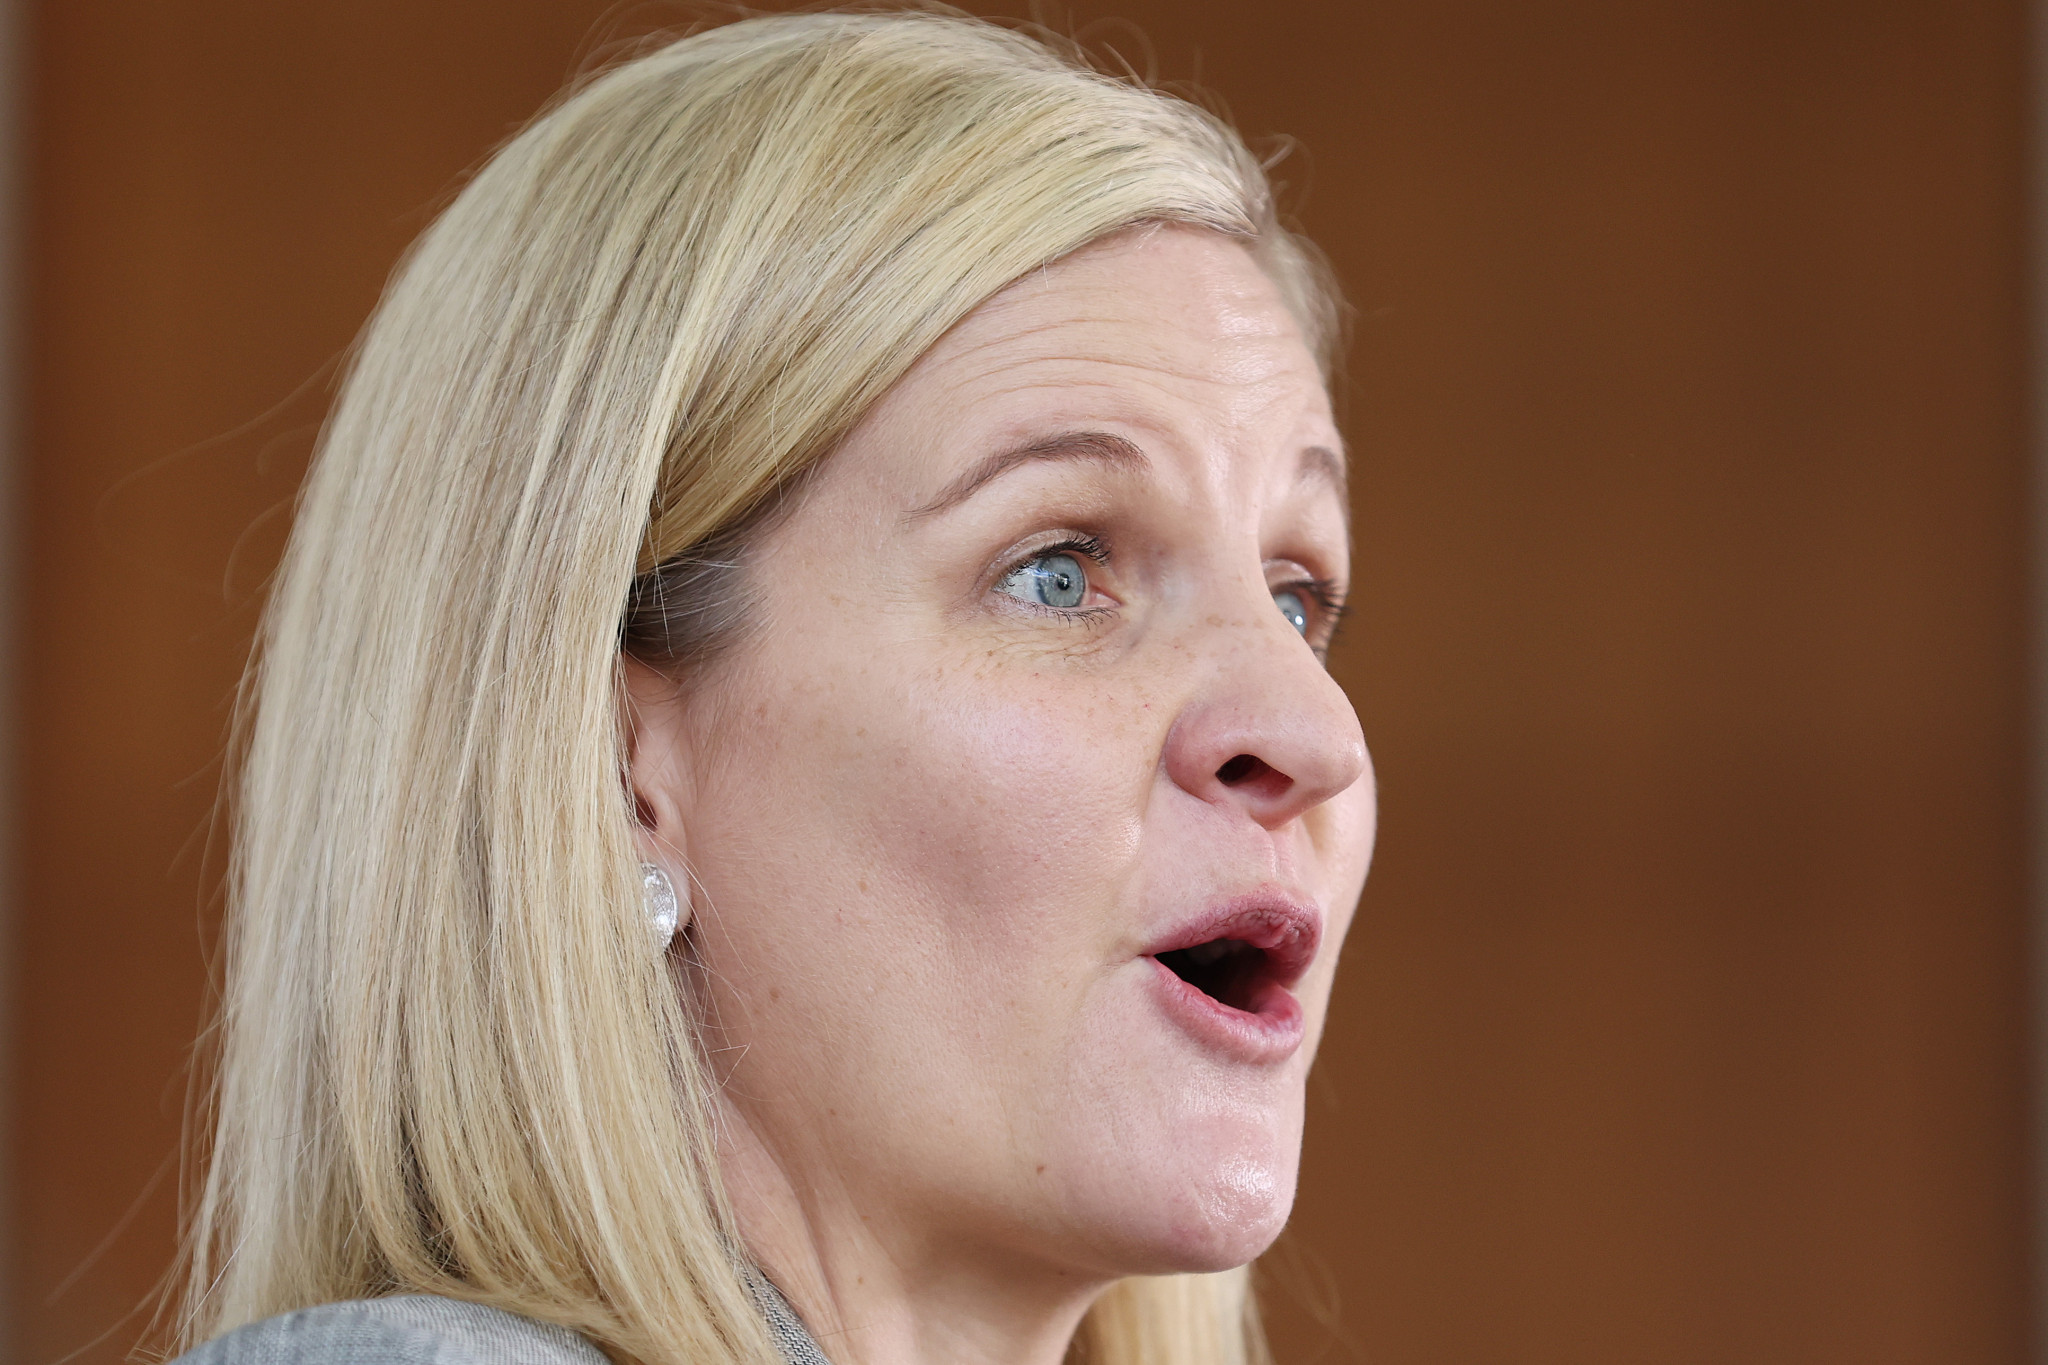 Zimbabwe Sports Minister and IOC member Kirsty Coventry has been asked by the Zimbabwe FA to retract comments made in Parliament ©Getty Images